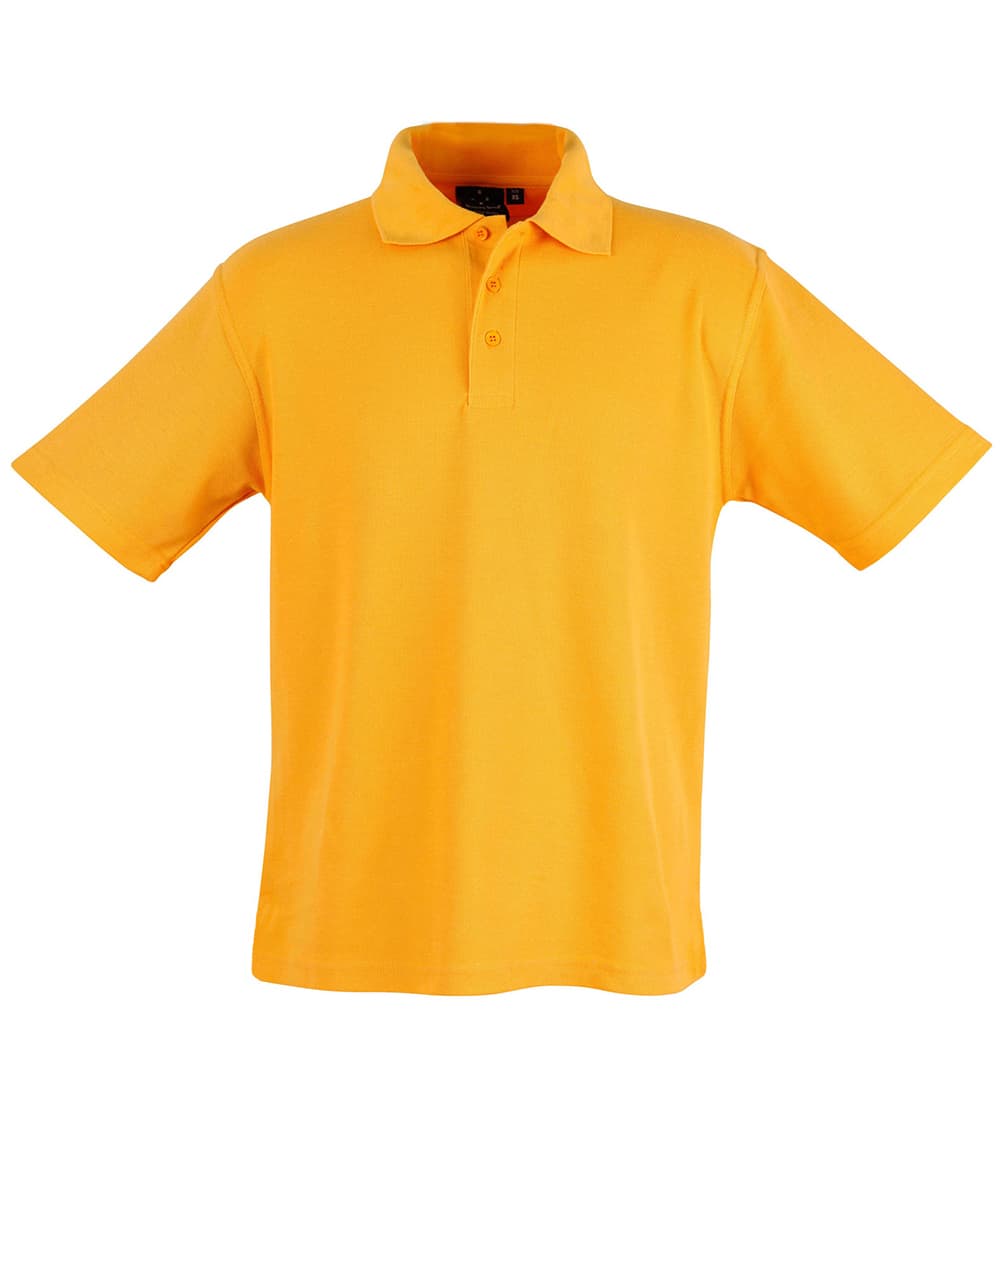 Kids Poly/Cotton Pique Knit Short Sleeve Polo (Unisex) PS11K | Gold